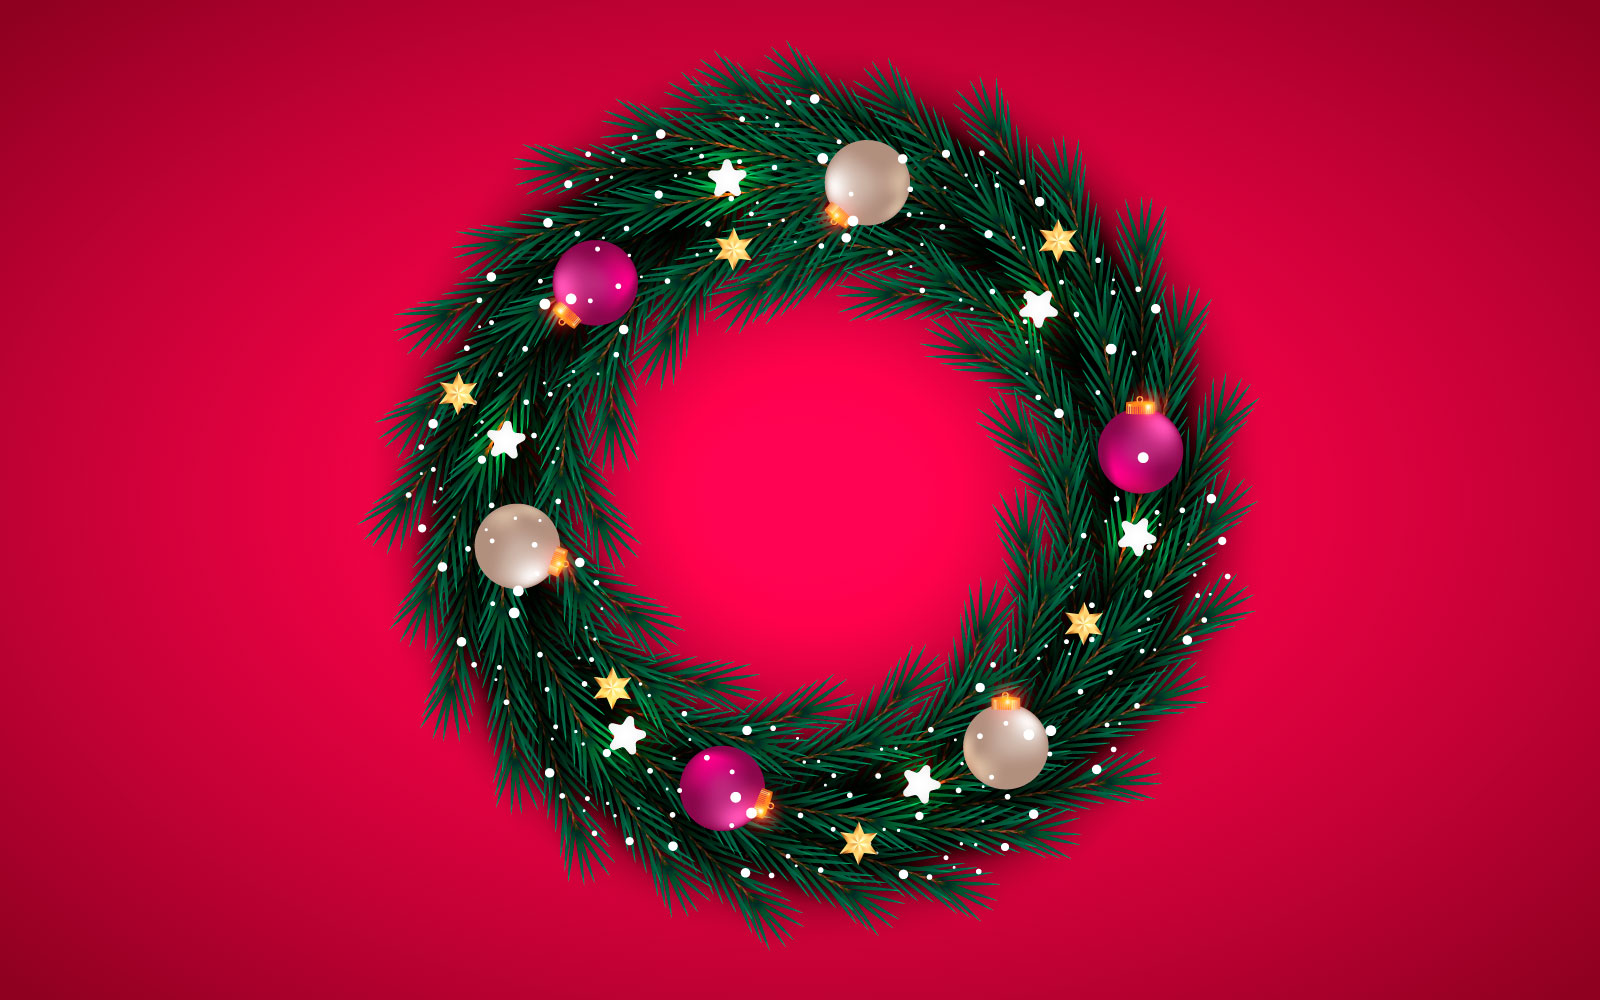 Christmas wreath vector design merry christmas text with garland elements